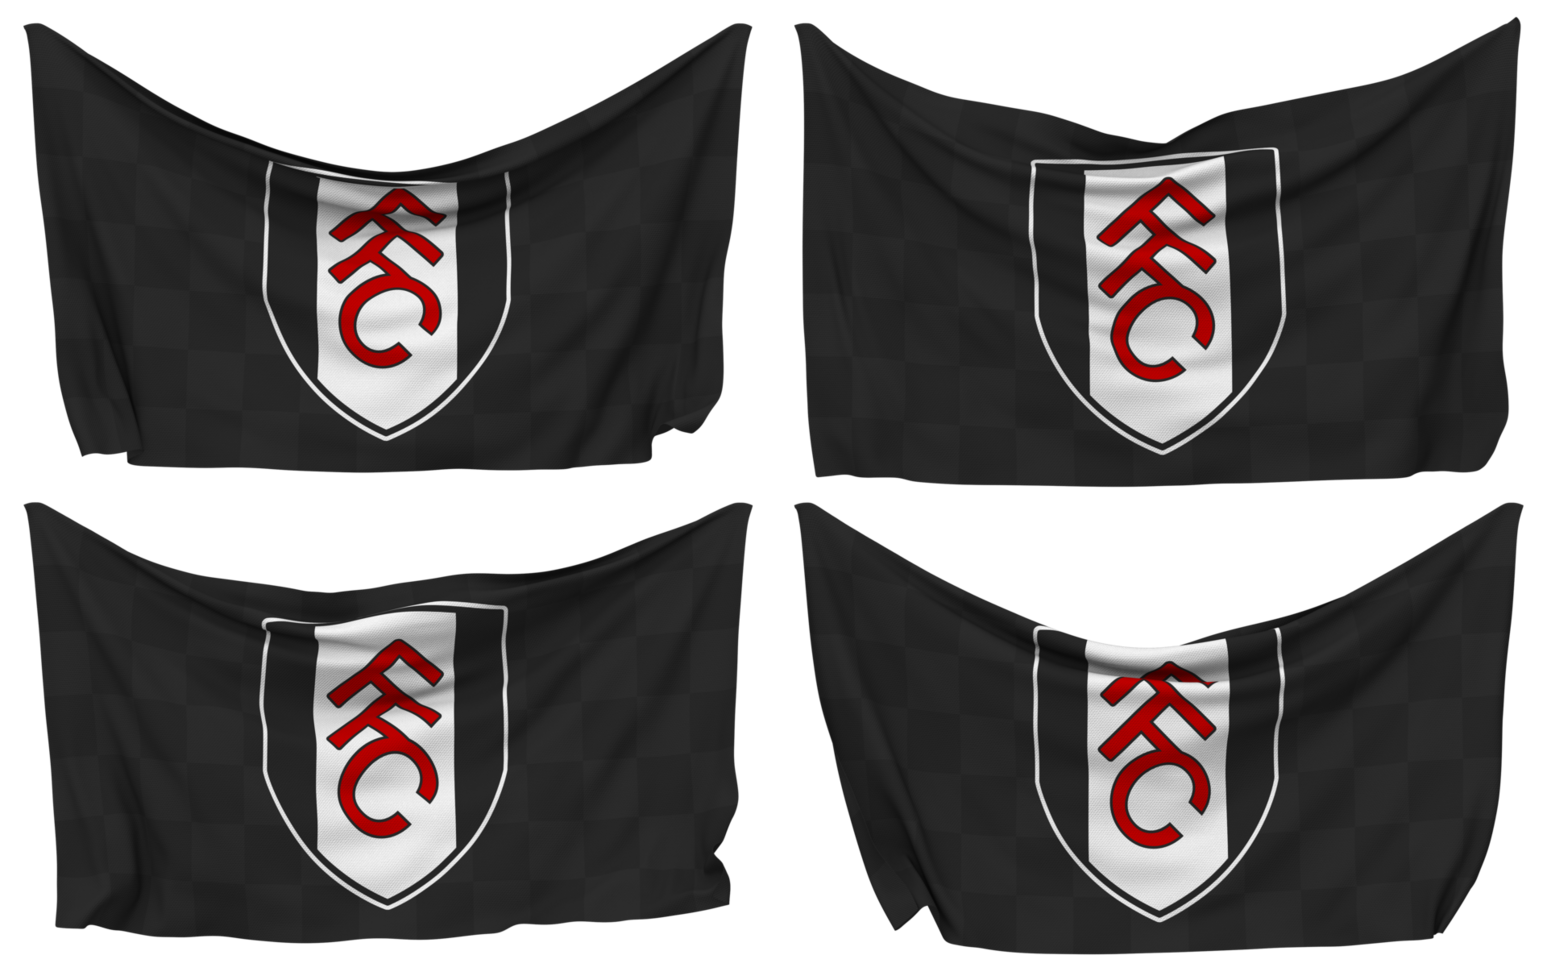 Fulham Football Club Pinned Flag from Corners, Isolated with Different Waving Variations, 3D Rendering png